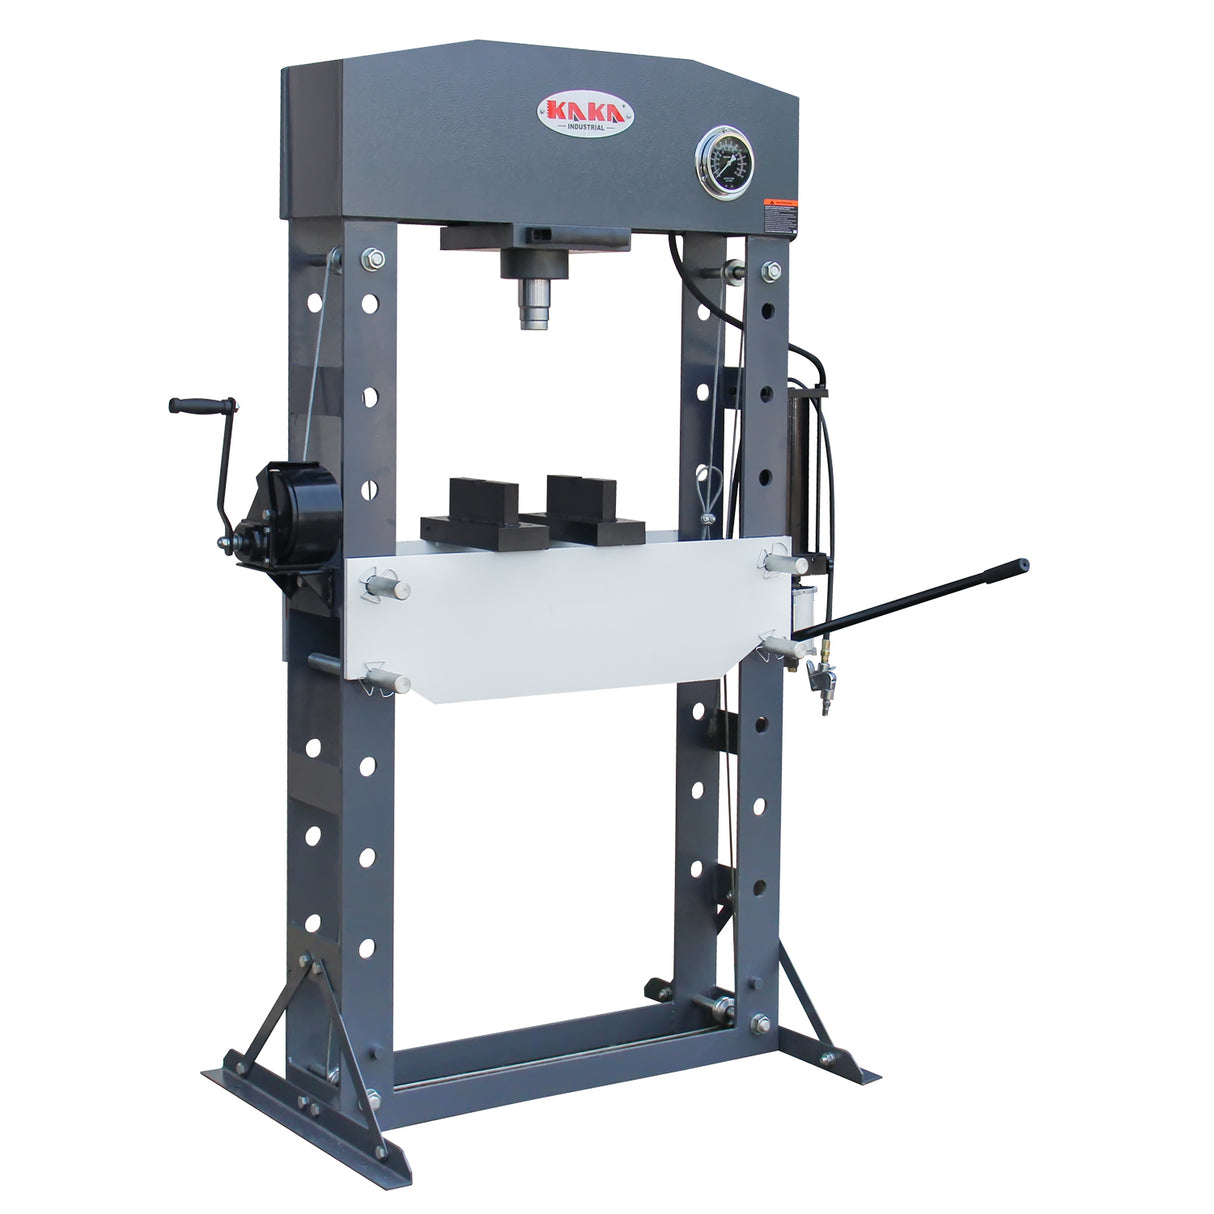 KAKA Indsutrial  HP-50P Air/Hand Operated H-Frame Press, 50 ton Frame Capacity, 7.8 in Stroke